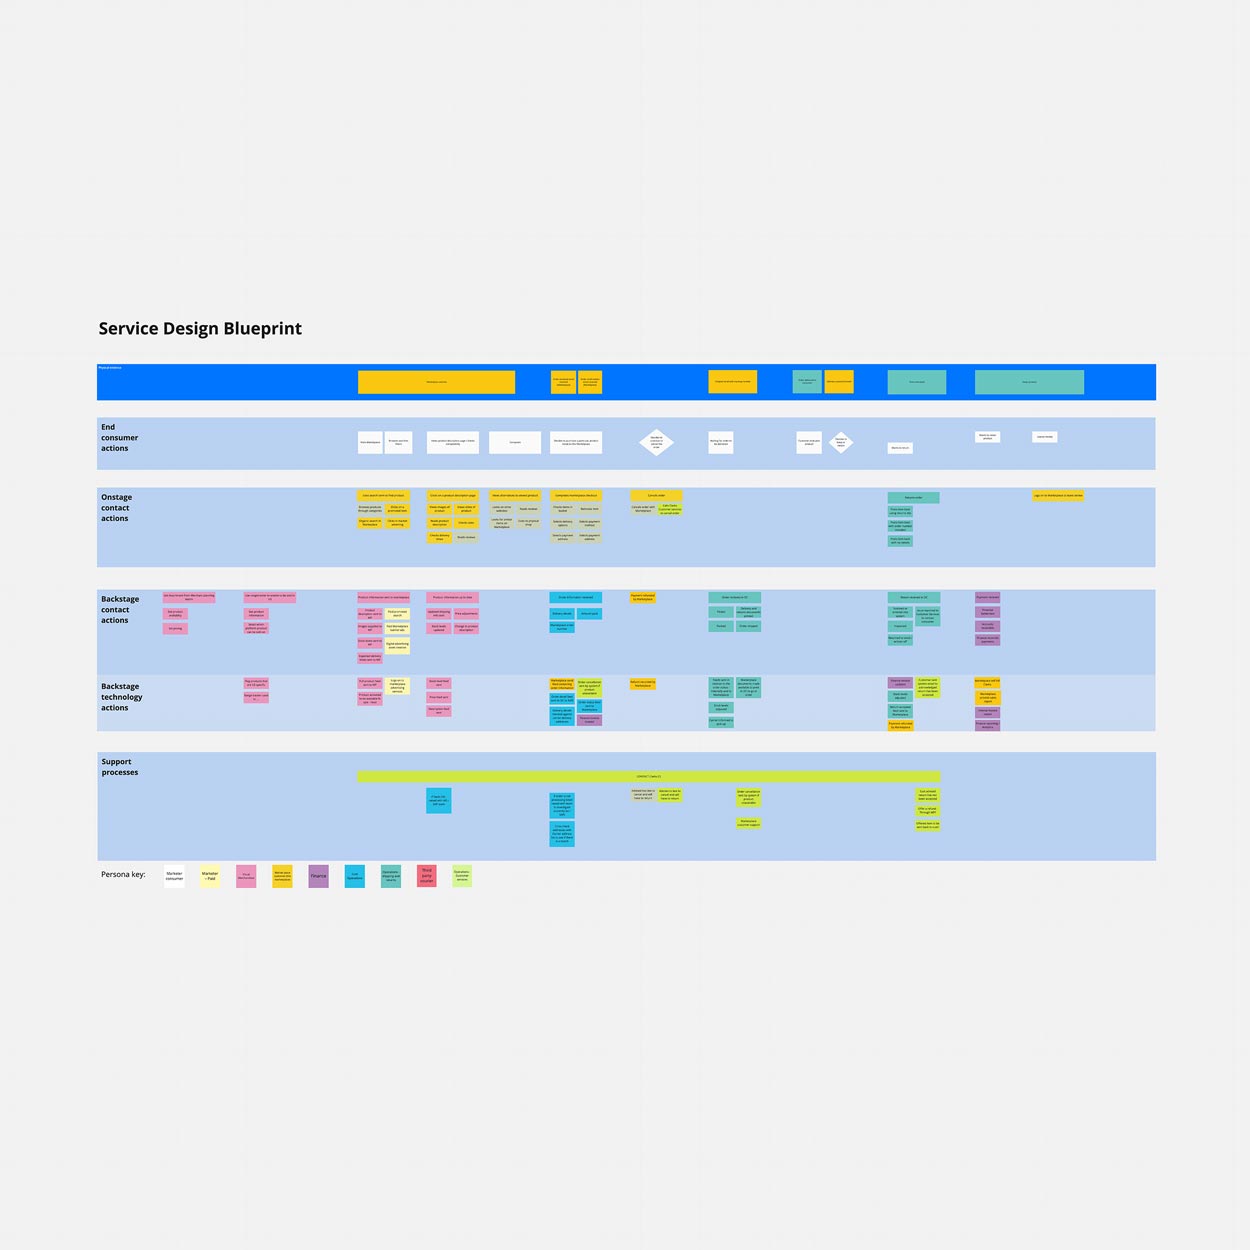 Complete Service Design Blueprint for all of the interactions performed by the Customer and Consumer in the US Marketplaces processes.